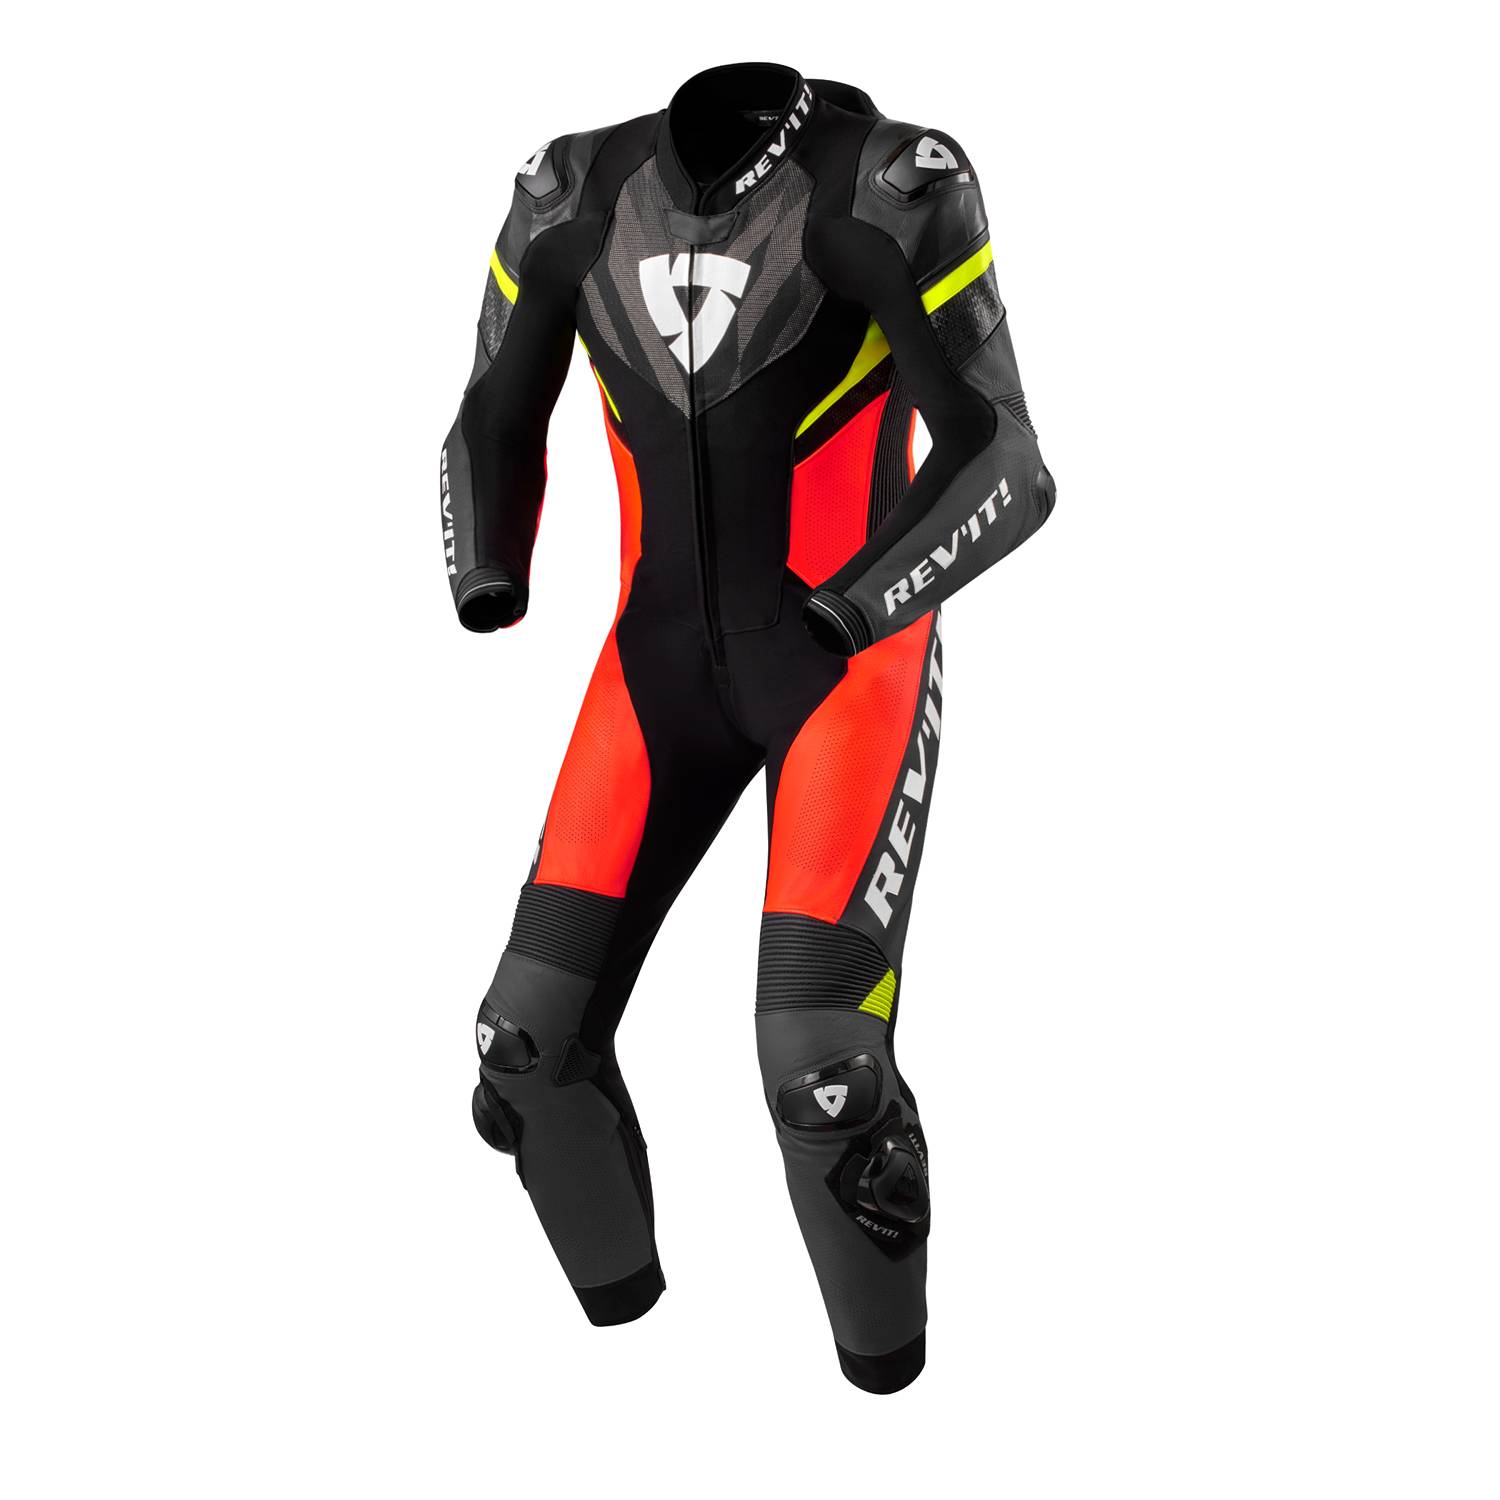 Image of REV'IT! Hyperspeed 2 One Piece Suit Black Neon Red Size 54 ID 8700001359818